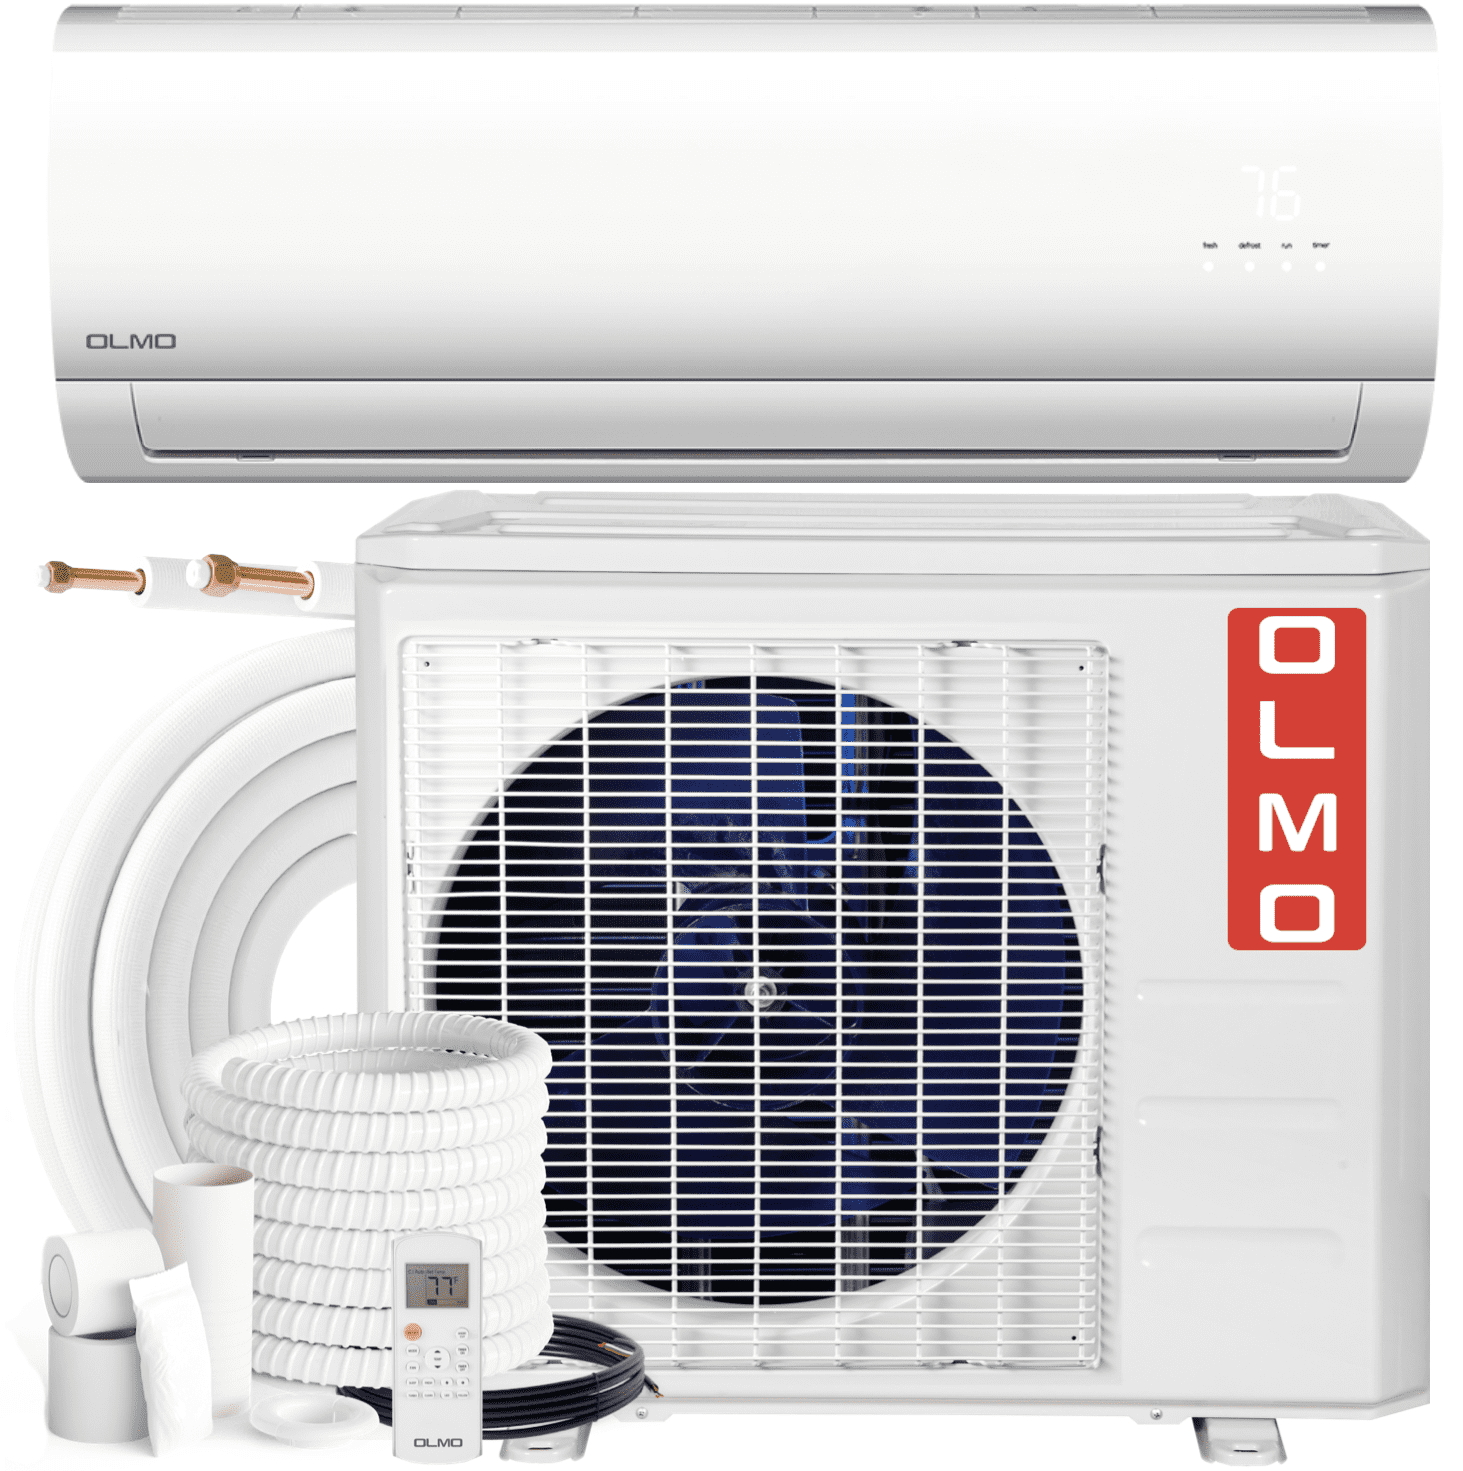 Cooper & Hunter 9,000 BTU 115V 19 SEER Ductless Mini Split AC/Heating System MIA Series Pre-Charged Inverter Heat Pump with 16ft Installation Kit